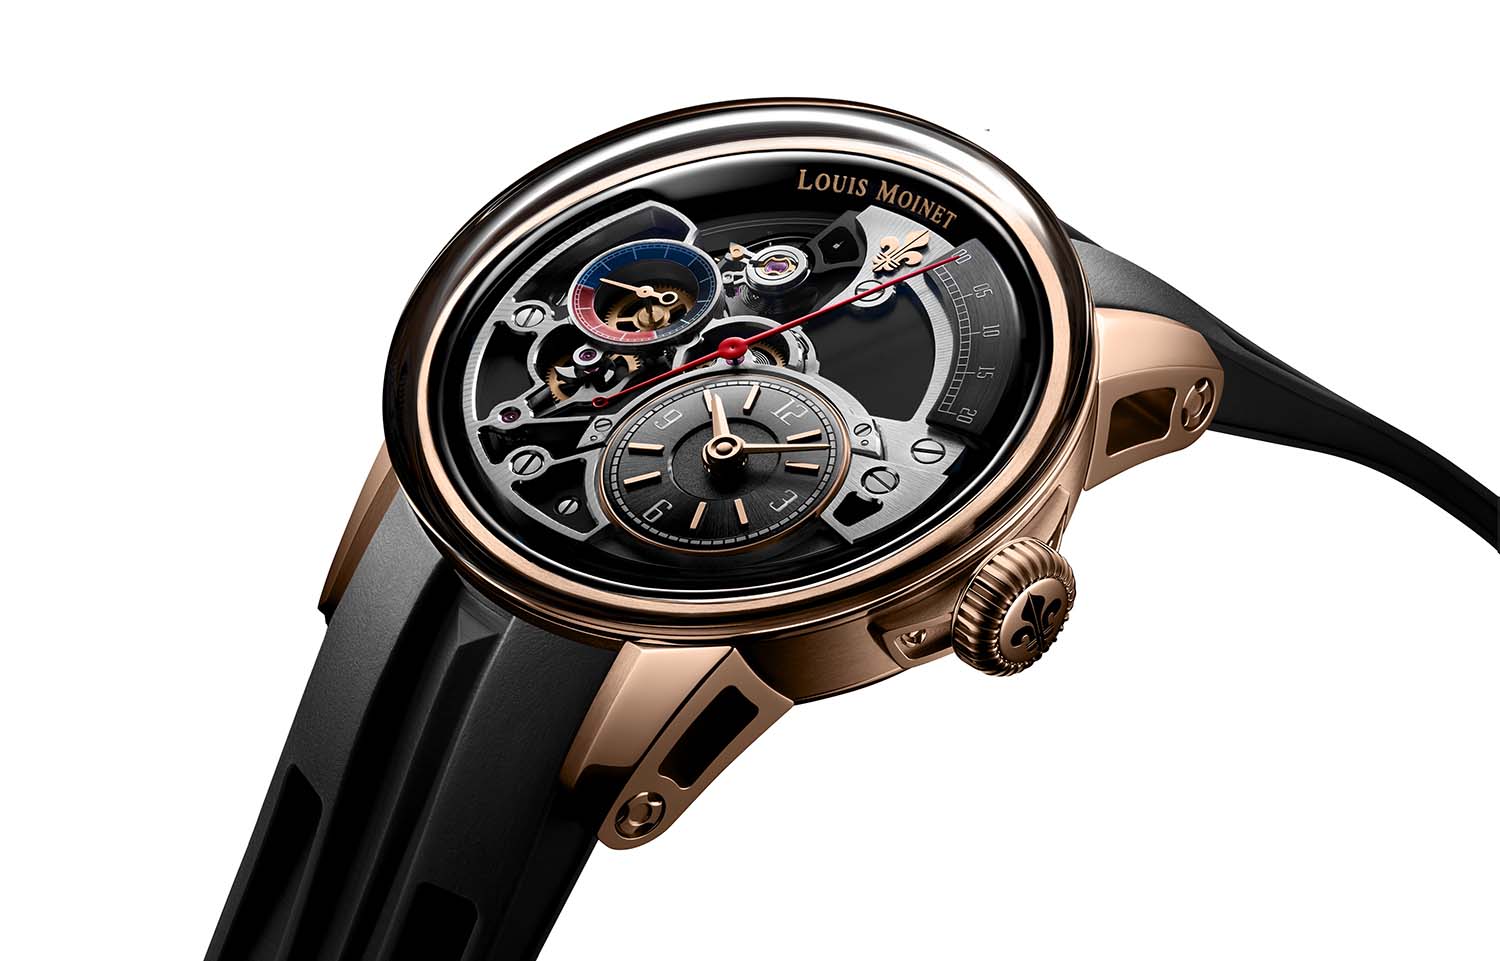 Louis Moinet’s Tempograph Spirit Emerges As A Champion Of Visual Mechanical Art